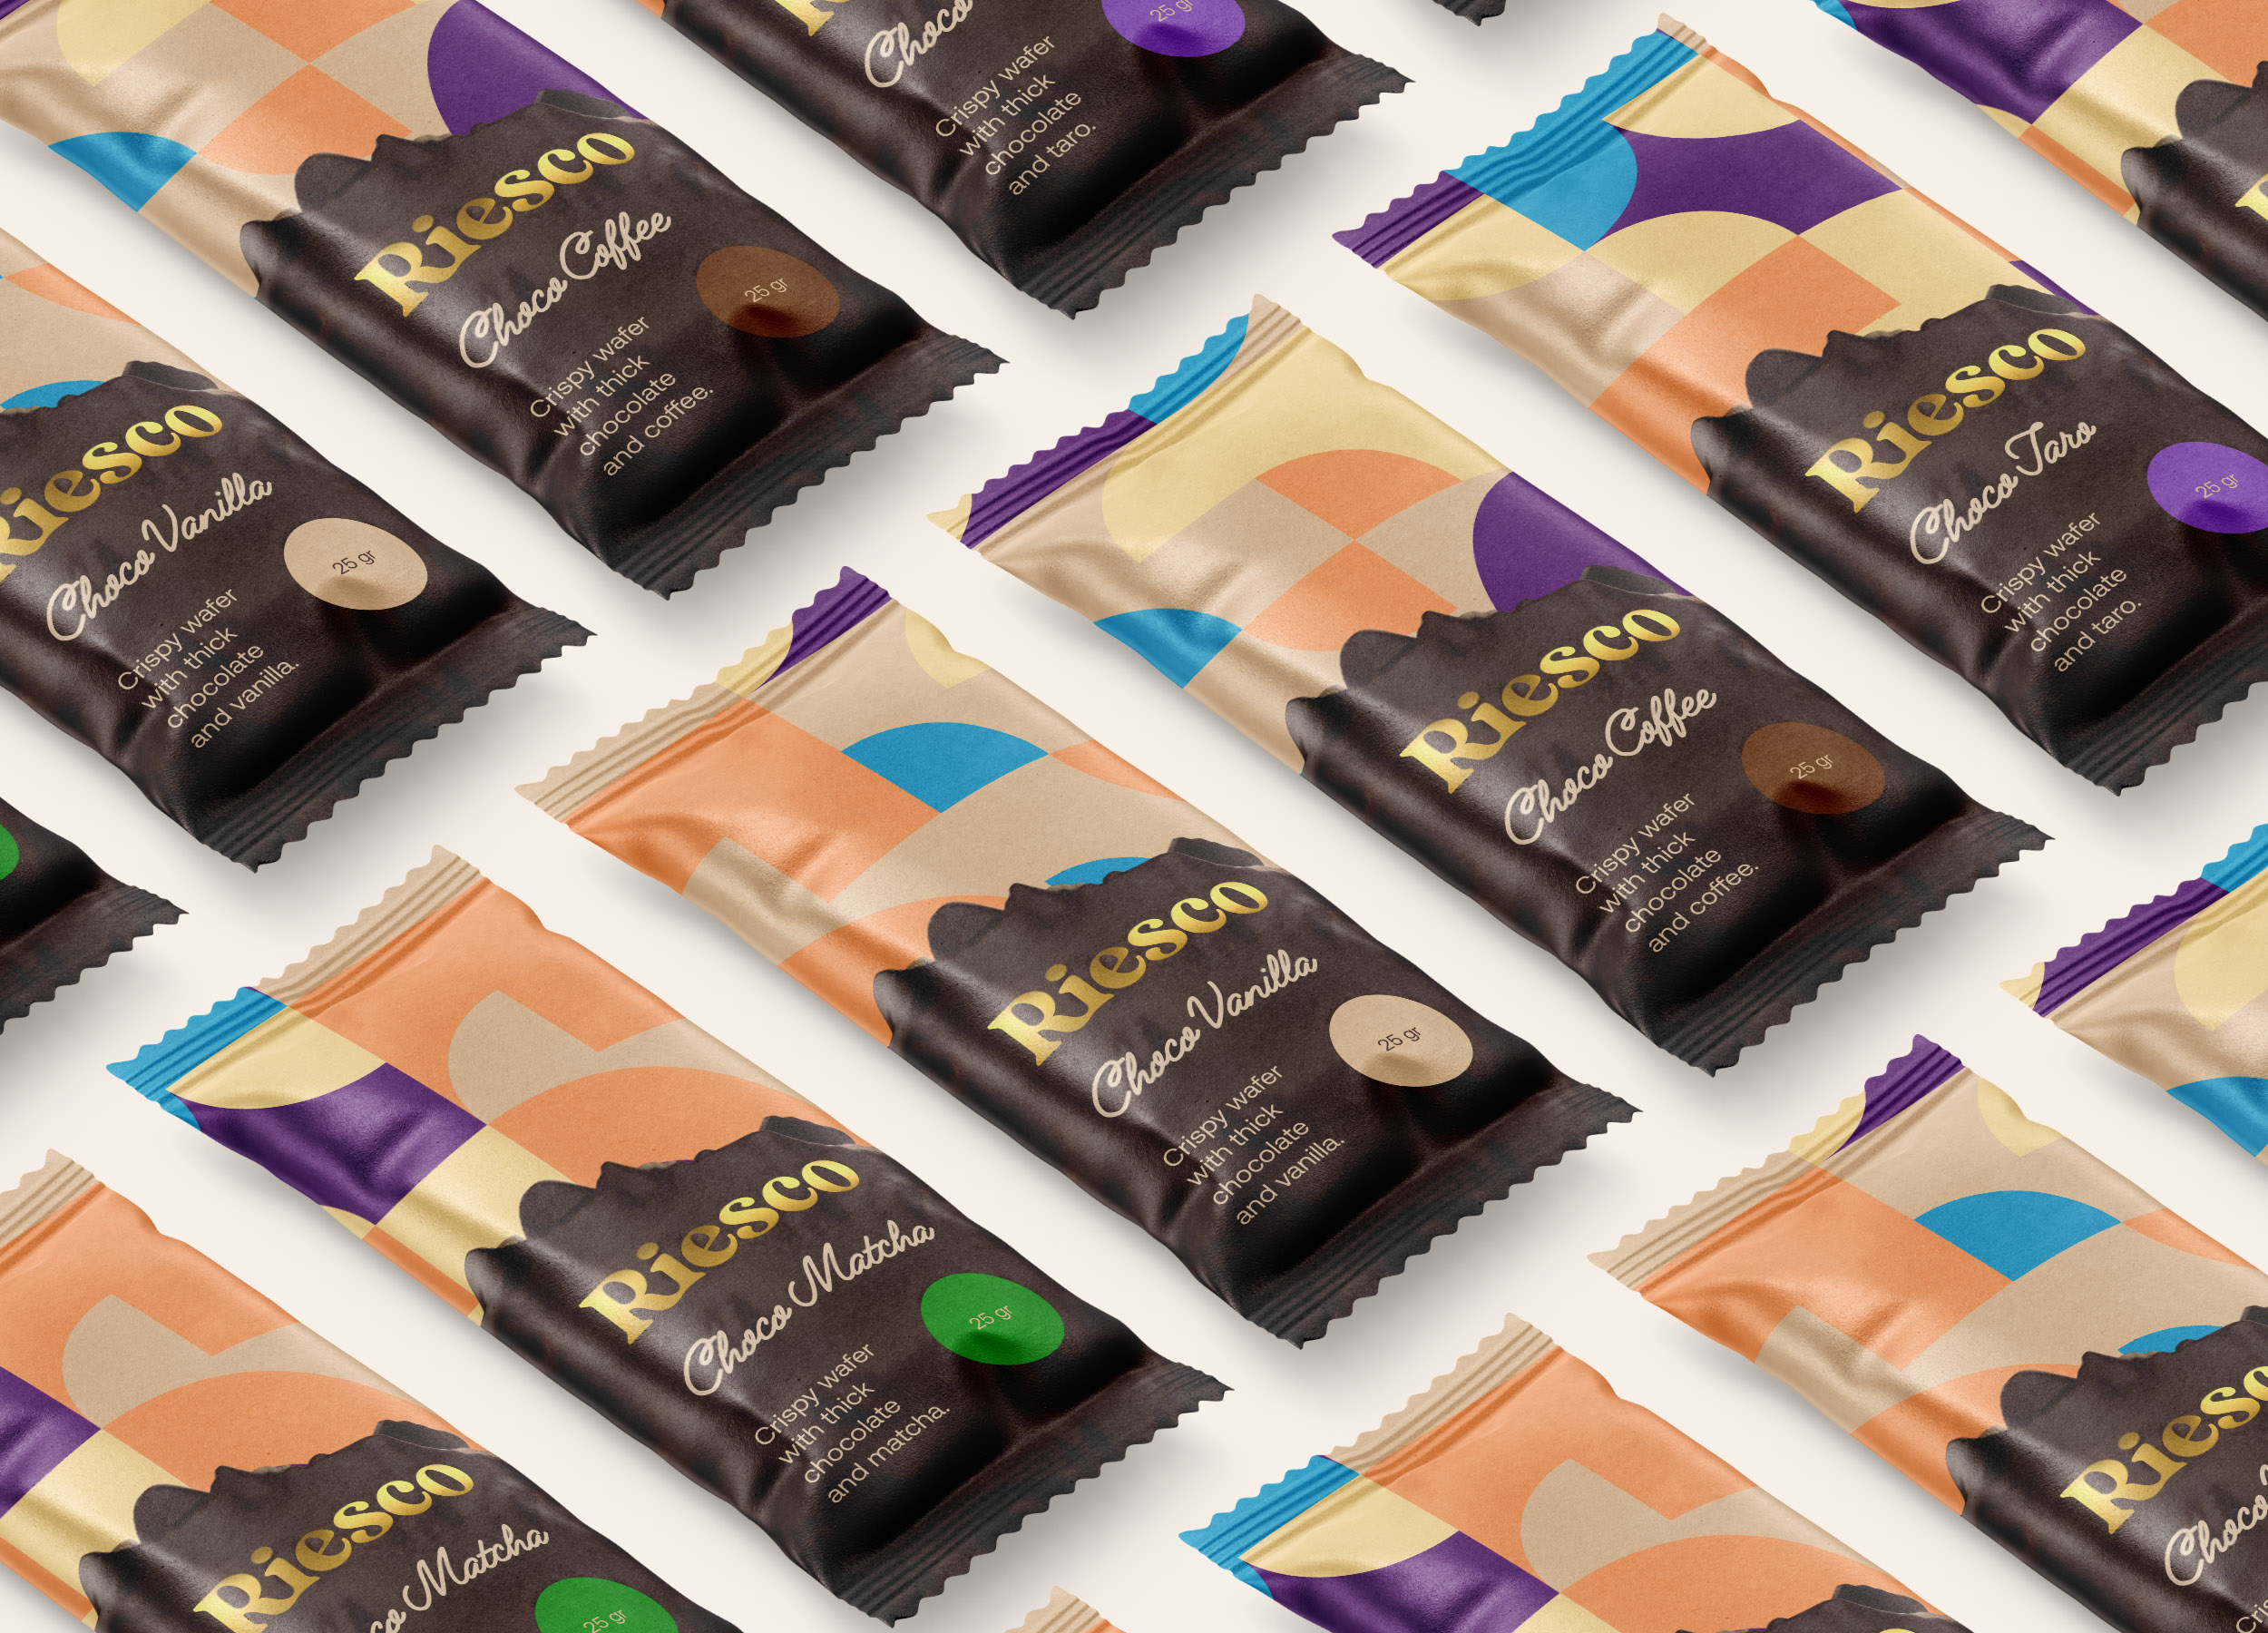 Widarto Impact Creating Identity and Packaging Design for RIESCO Chocolate Wafer